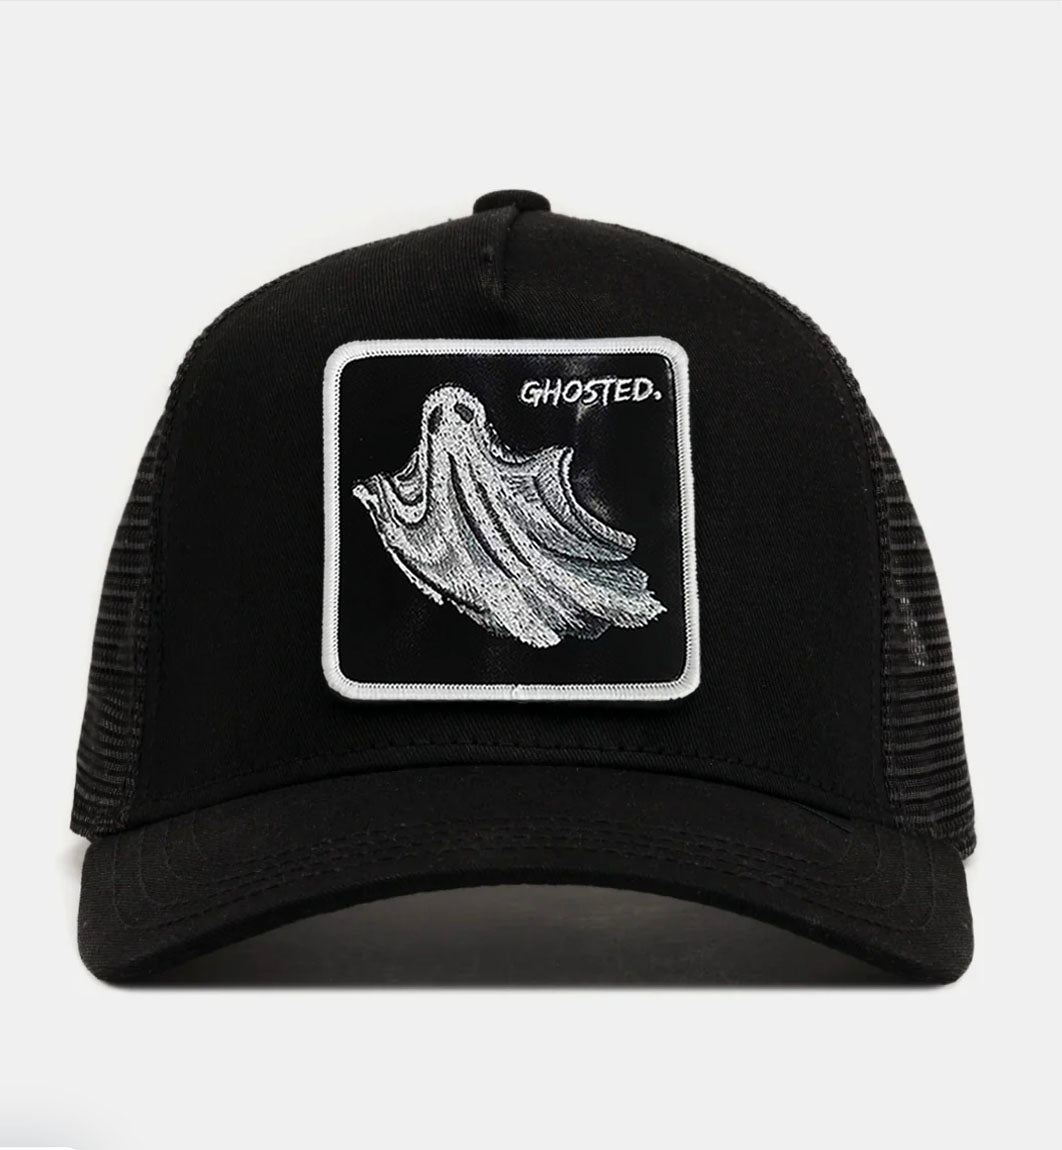 Ghost - "Ghosted" Trucker Hat